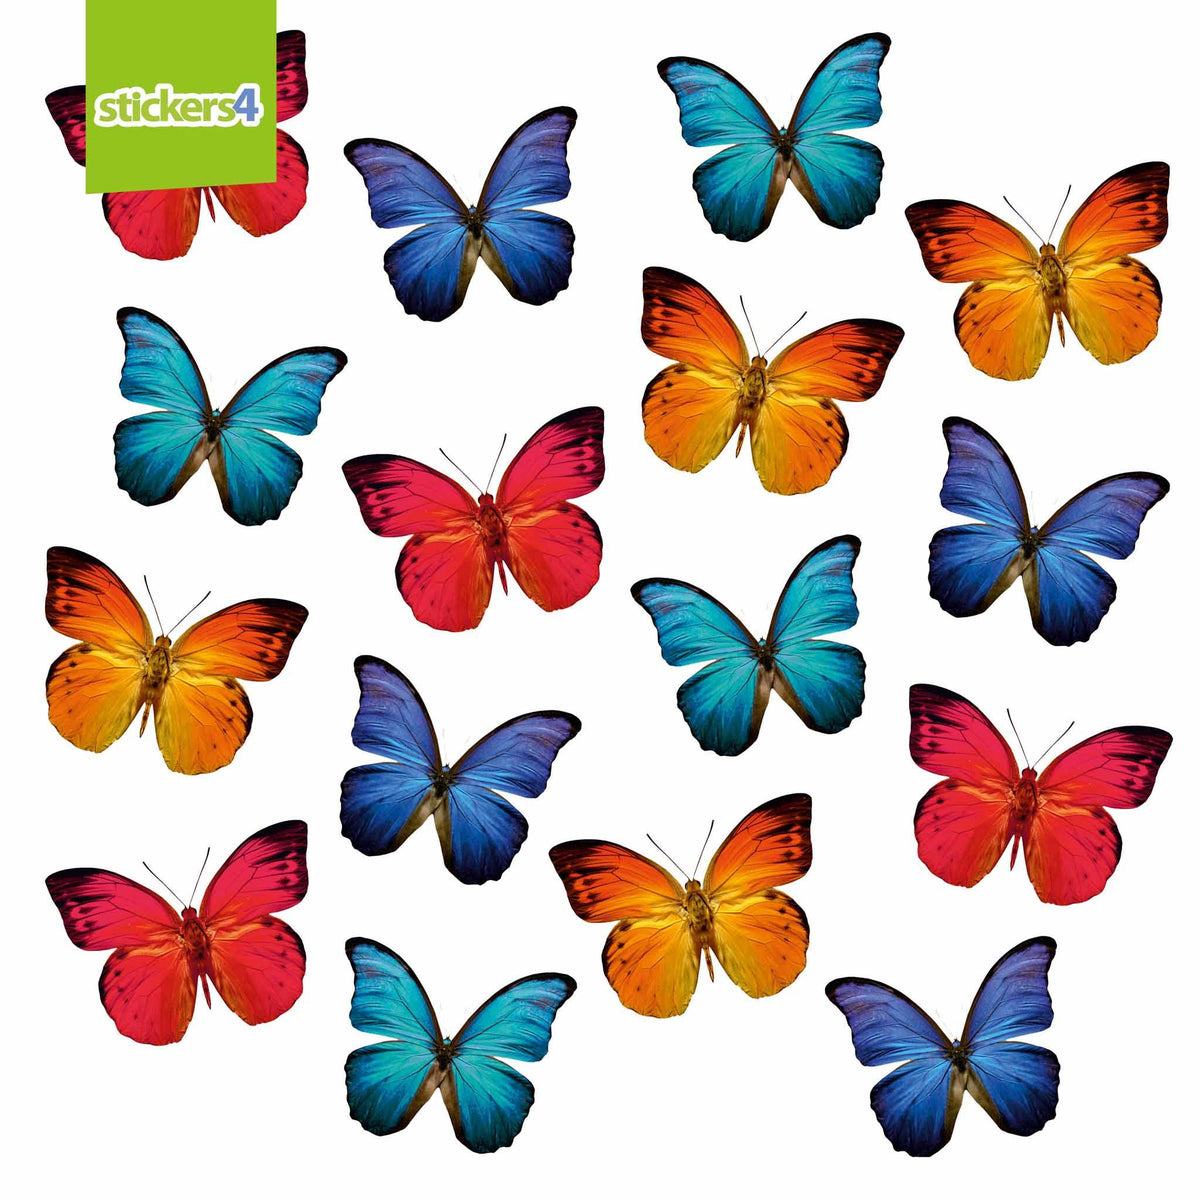 16 Large Colourful Butterfly Static Cling Window Stickers Decorative Bird Strike Prevention